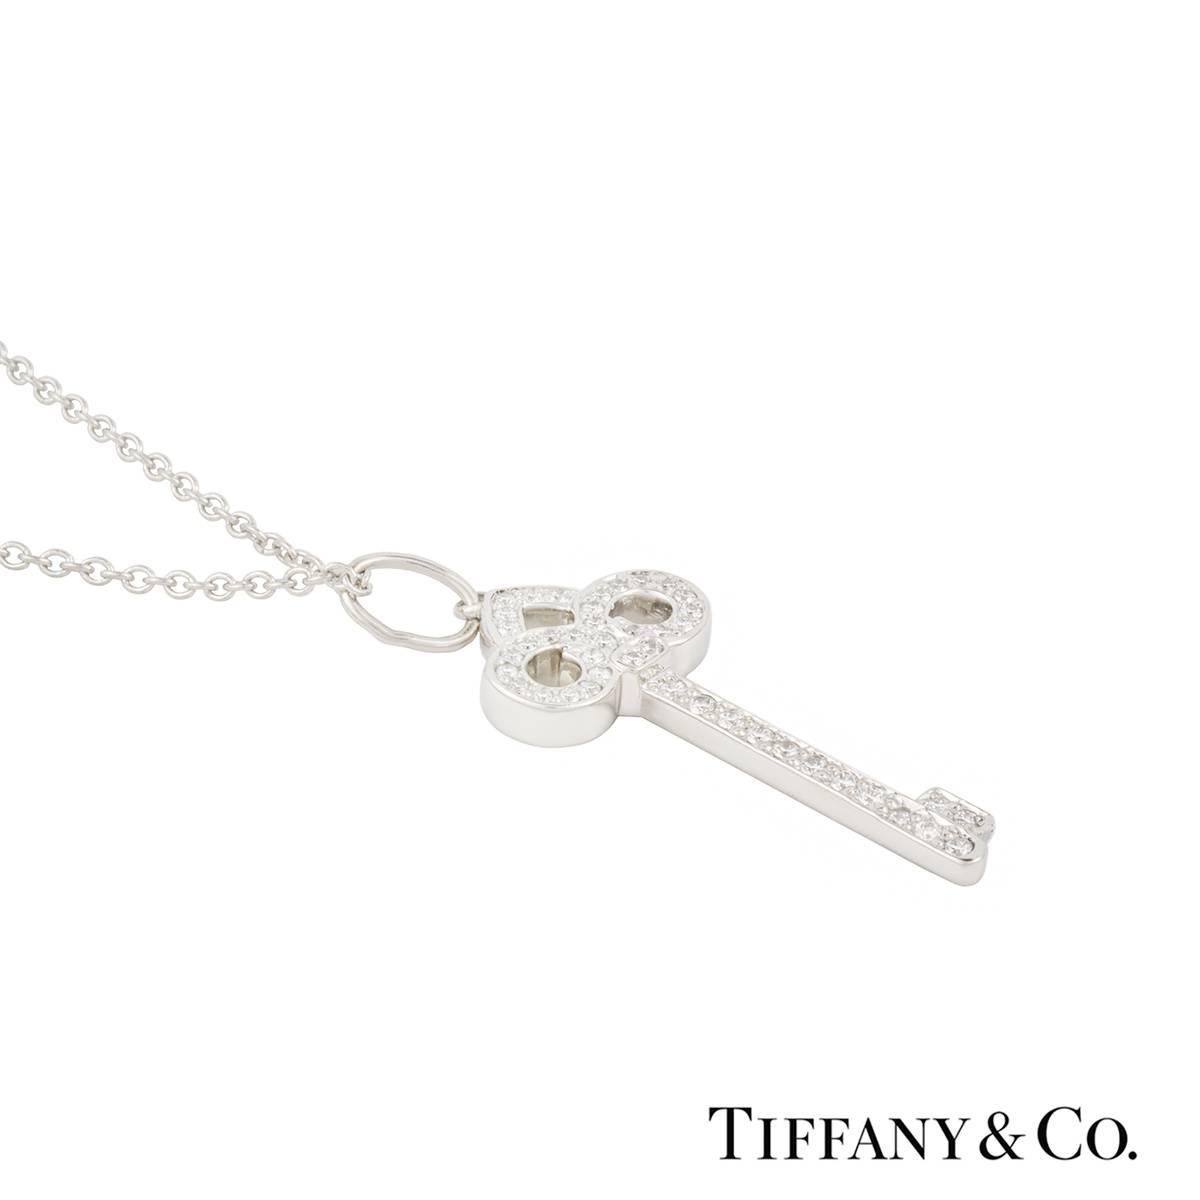 An elegant diamond set pendant from the Tiffany & Co Keys collection in platinum. The key shape pedant features the Fleur De Lis motif set to the top and is pave set with round brilliant cut diamonds totalling approximately 0.12ct. The pendant